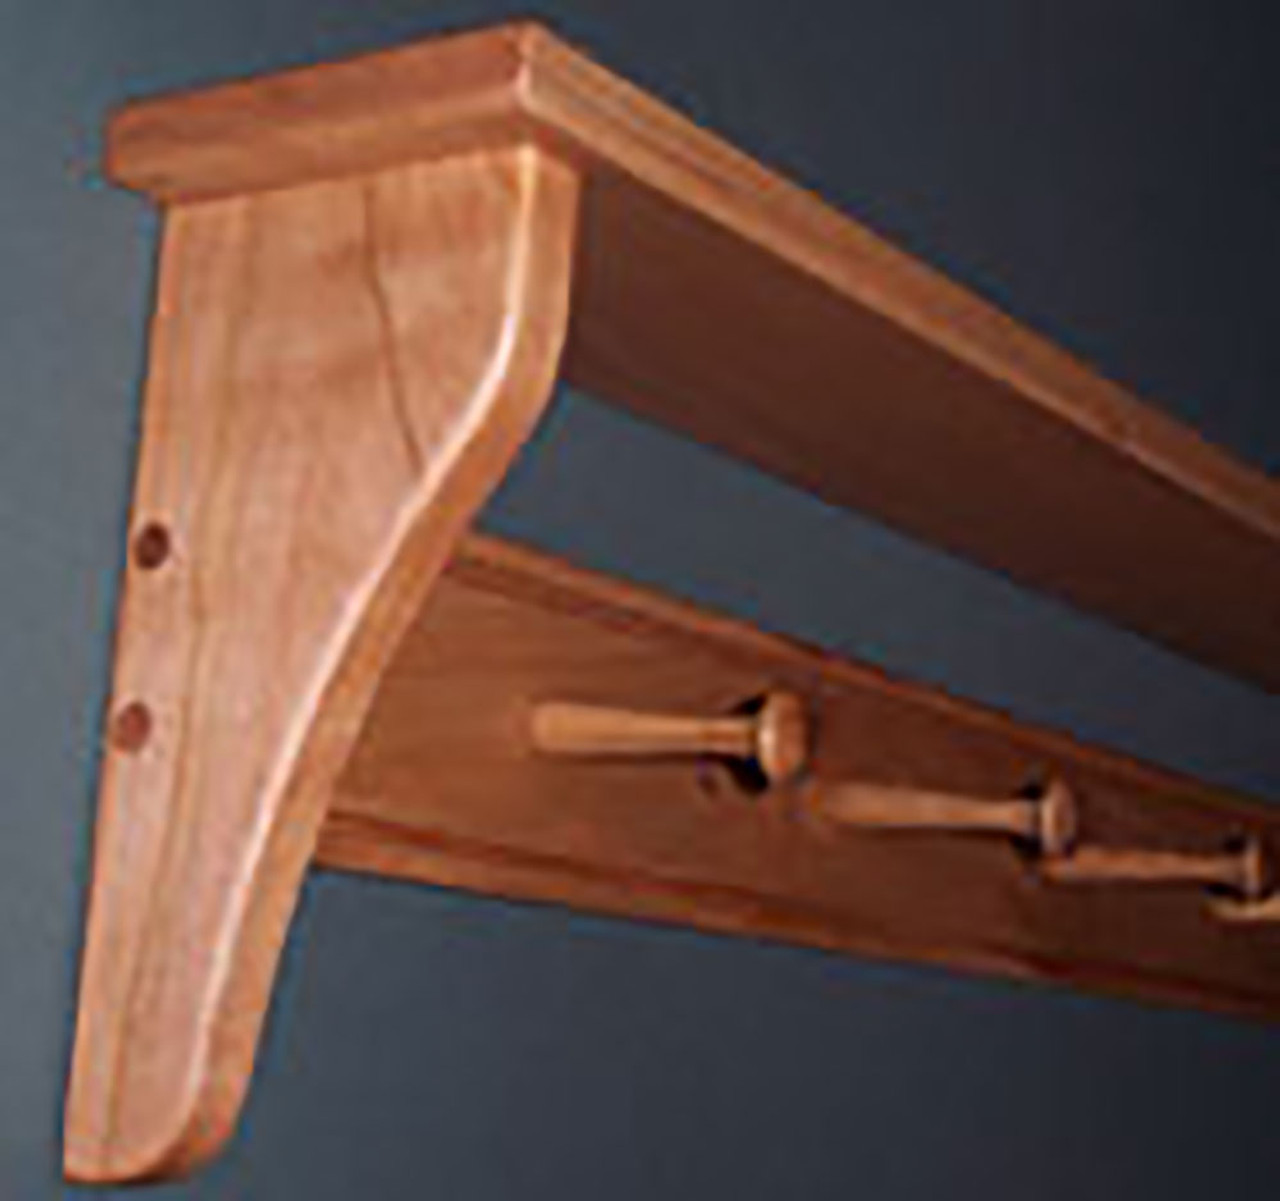 36 inch Shaker Peg Rail with 5 Shaker Pegs solid Maple wood made in US